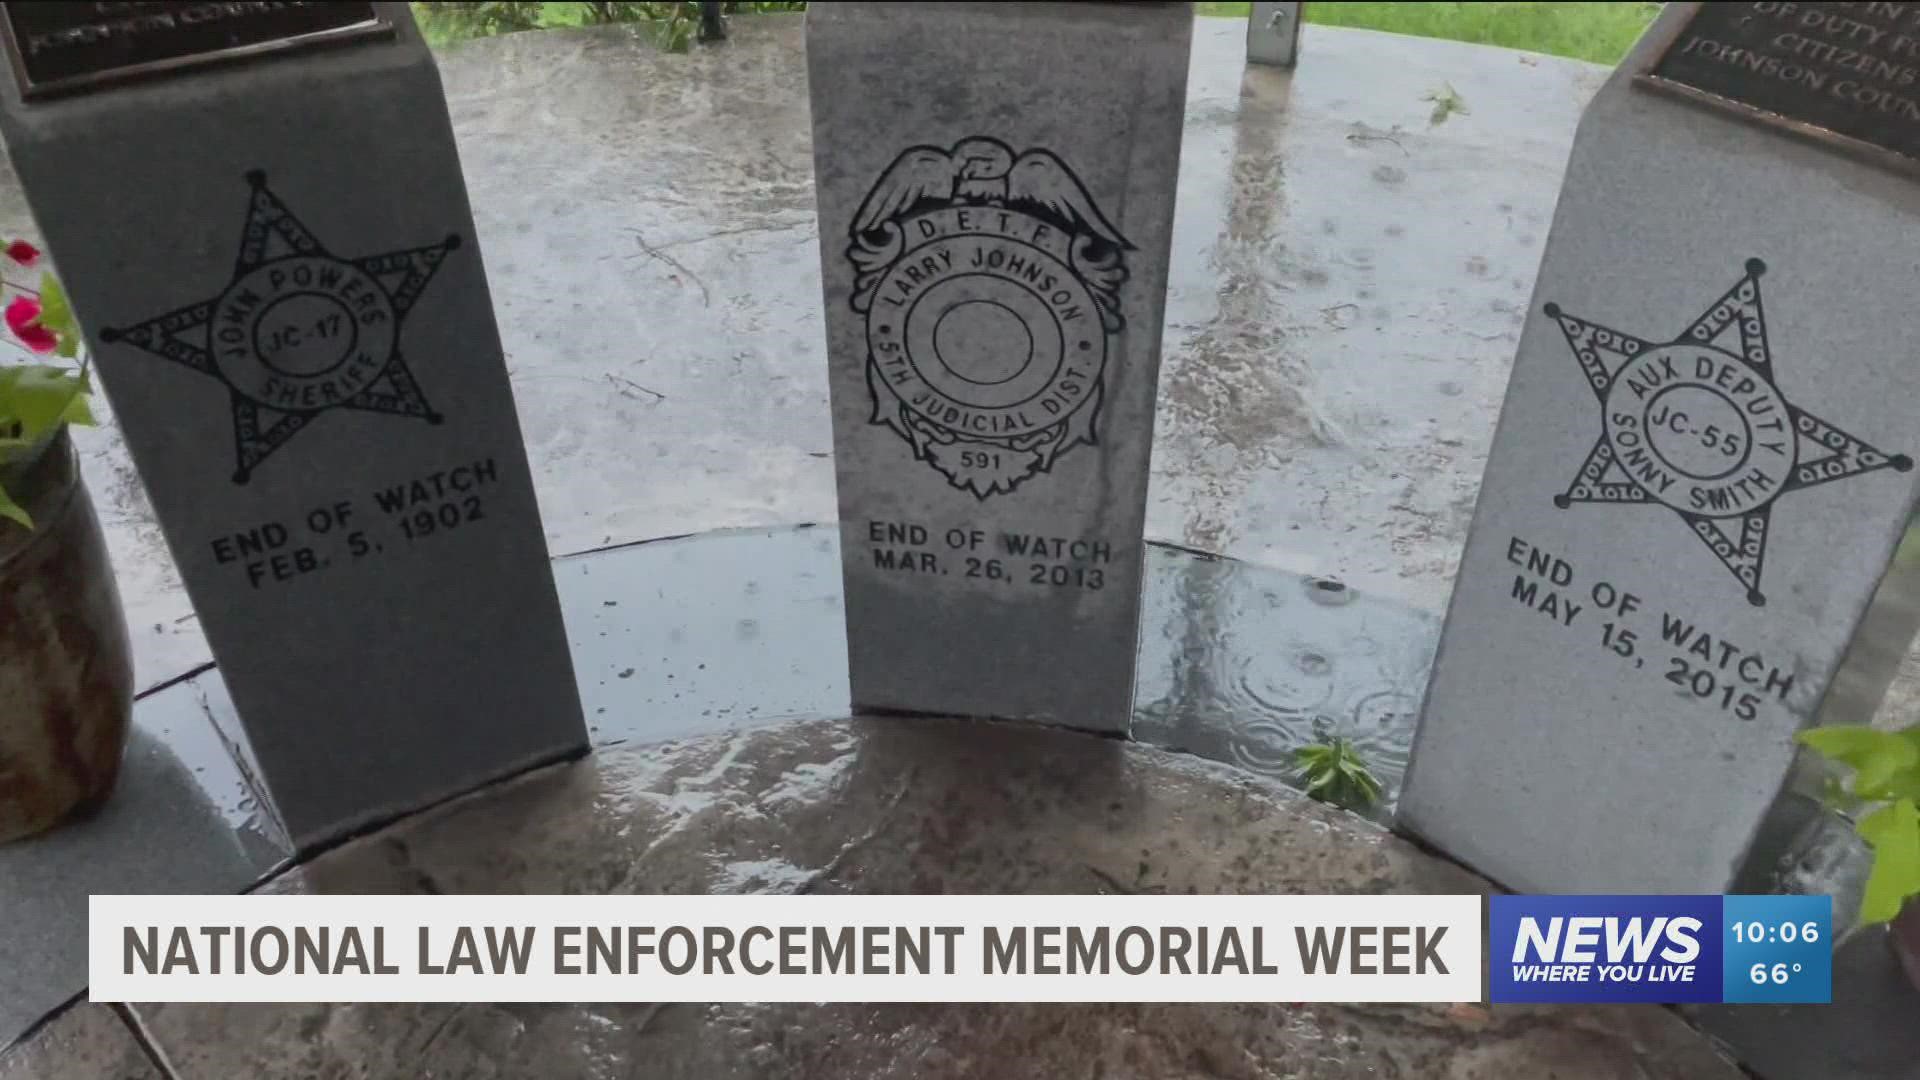 Members of the Johnson County community came together for National Peace Officer Memorial Day